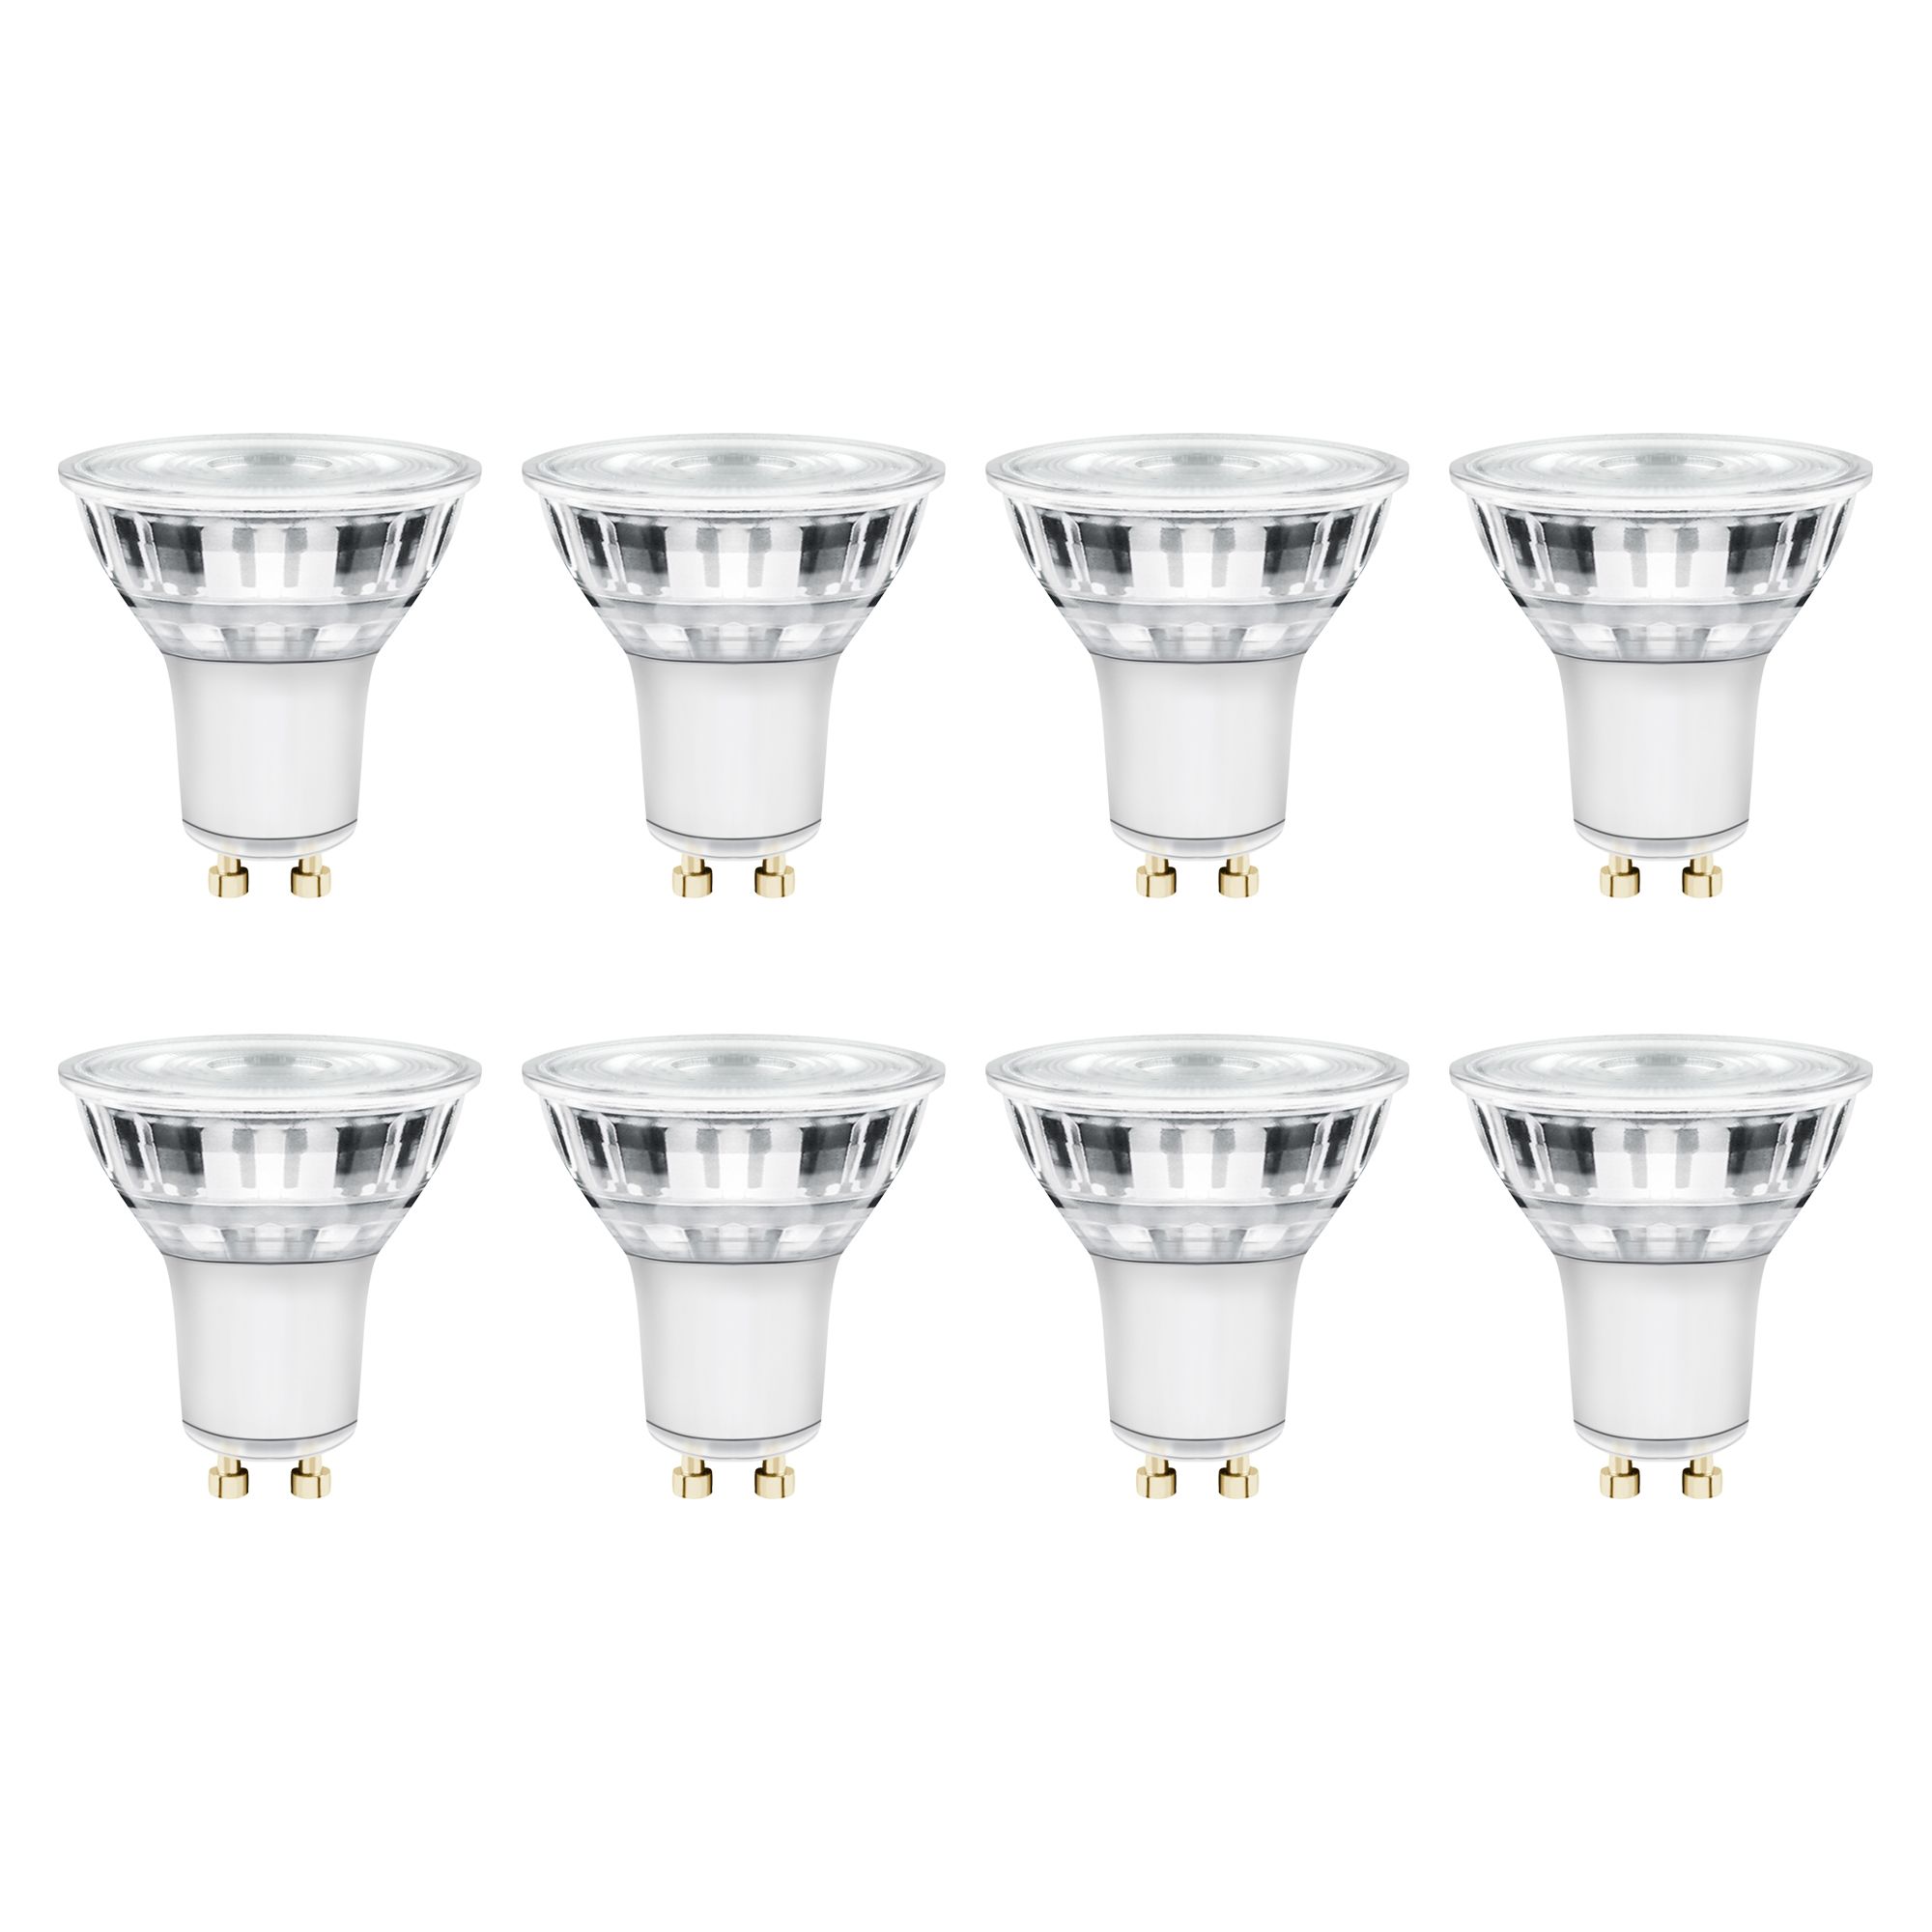 Diall 3.6W 345lm Clear Reflector spot Warm white LED Light bulb, Pack of 8